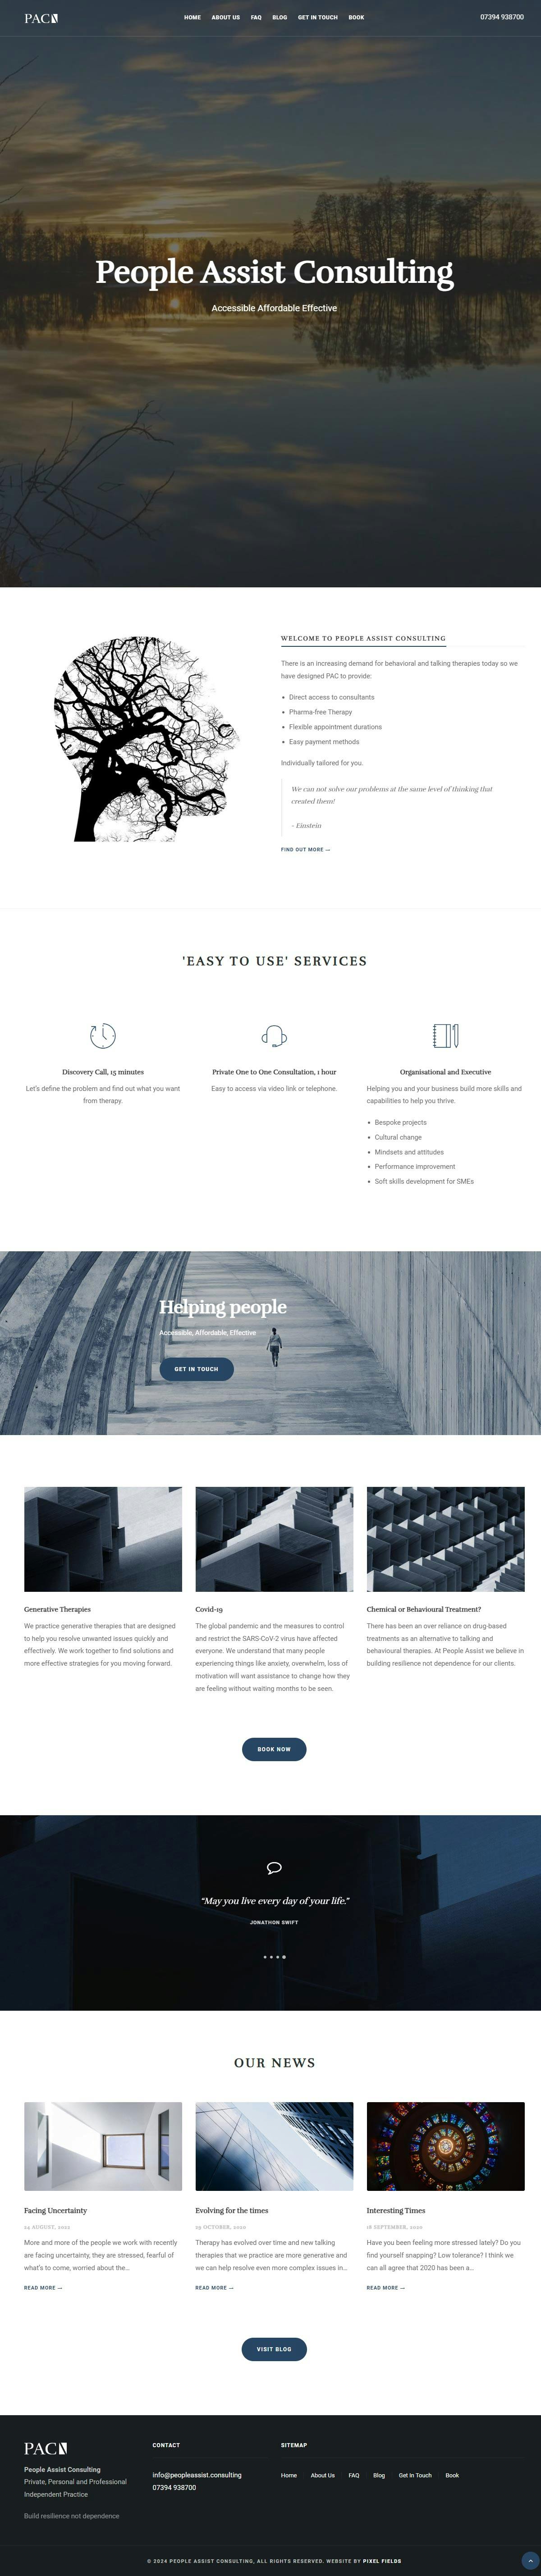 People Assist Consulting Behavioural Therapists, built in Concrete CMS